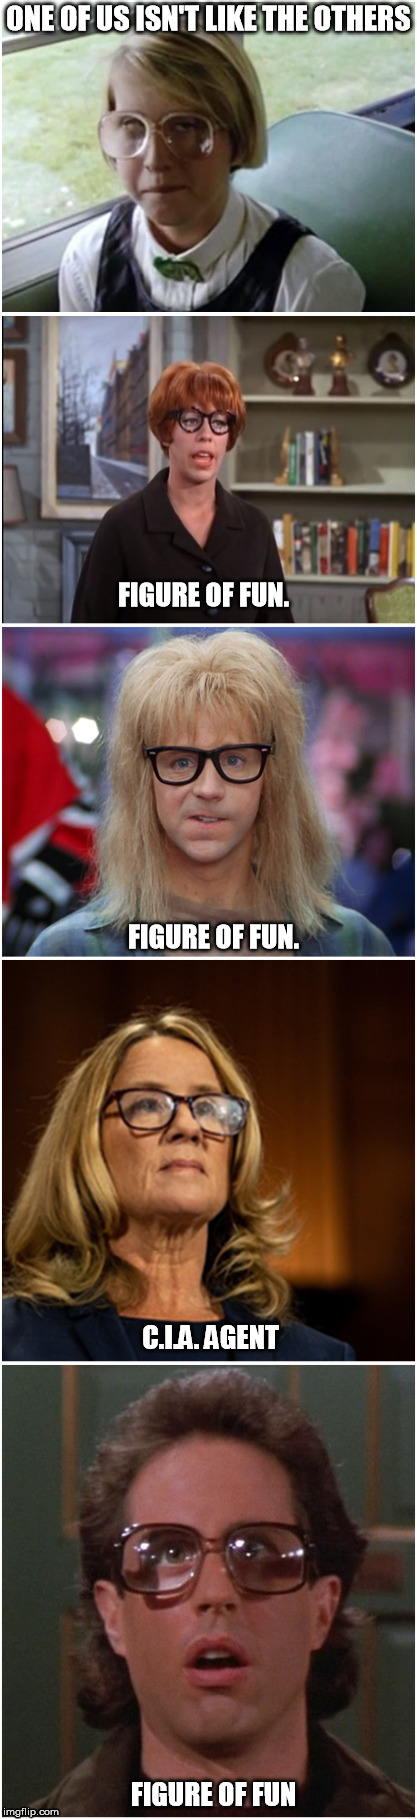 One of us is not like the others. | ONE OF US ISN'T LIKE THE OTHERS; FIGURE OF FUN. FIGURE OF FUN. C.I.A. AGENT; FIGURE OF FUN | image tagged in fake glasses,deep state,kavanaugh,politics,fake news,supreme court | made w/ Imgflip meme maker